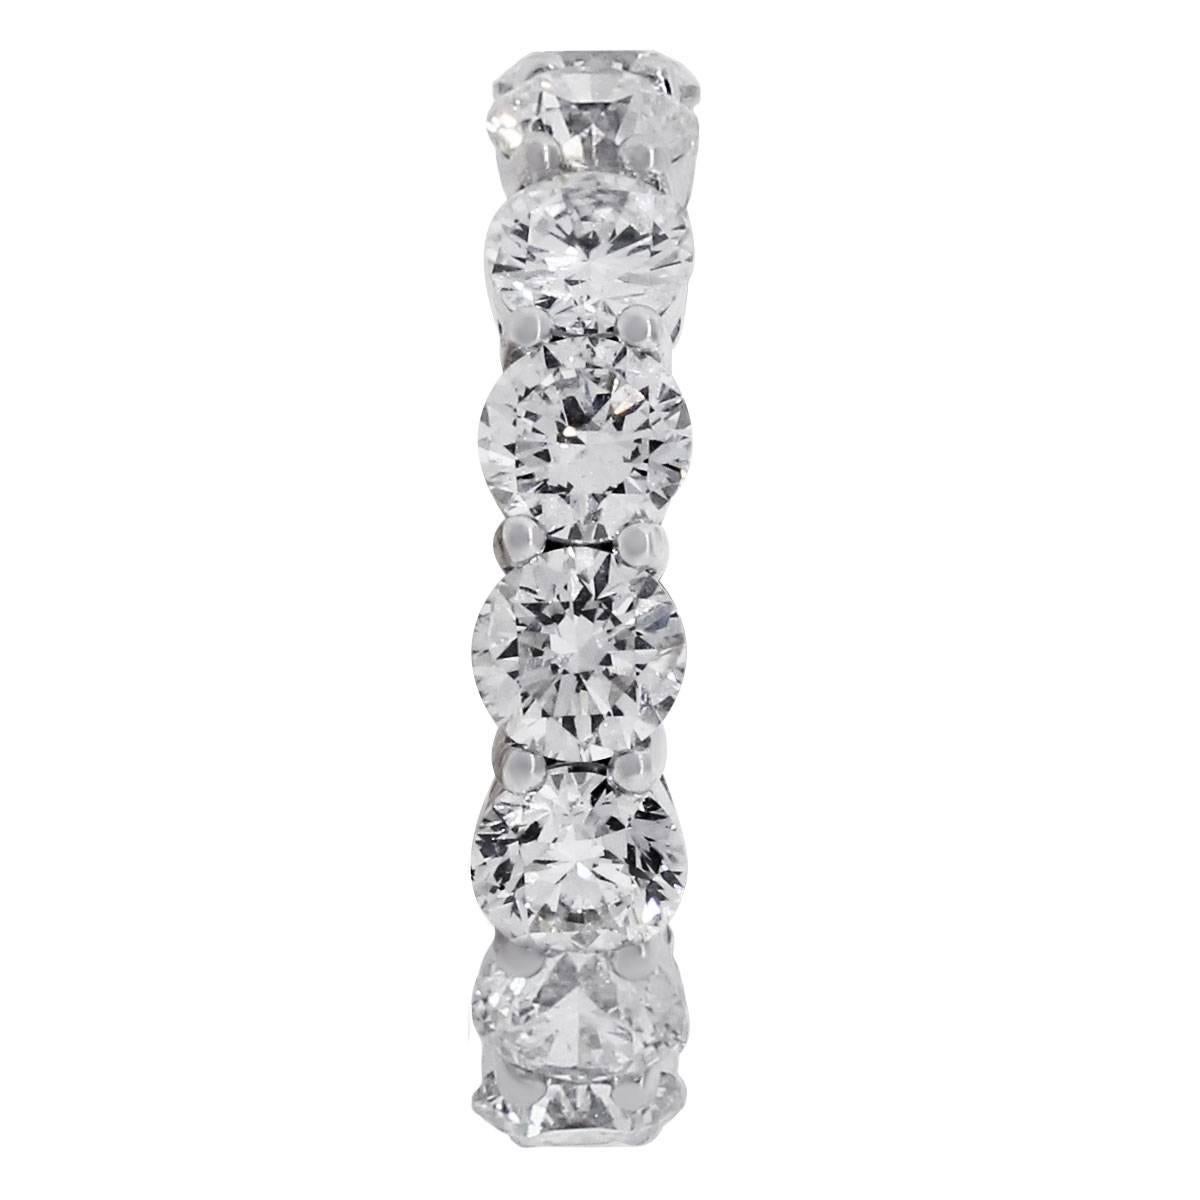 Material: 18k white gold
Diamond Details: Approximately 6.35ctw round brilliant diamonds. Diamonds are G/H in color and VS in clarity
Ring Size: 7 (cannot be sized)
Ring Measurements: 0.95″ x 0.16″ x 0.95″
Total Weight: 5.6g (3.6dwt)
SKU: A30310790